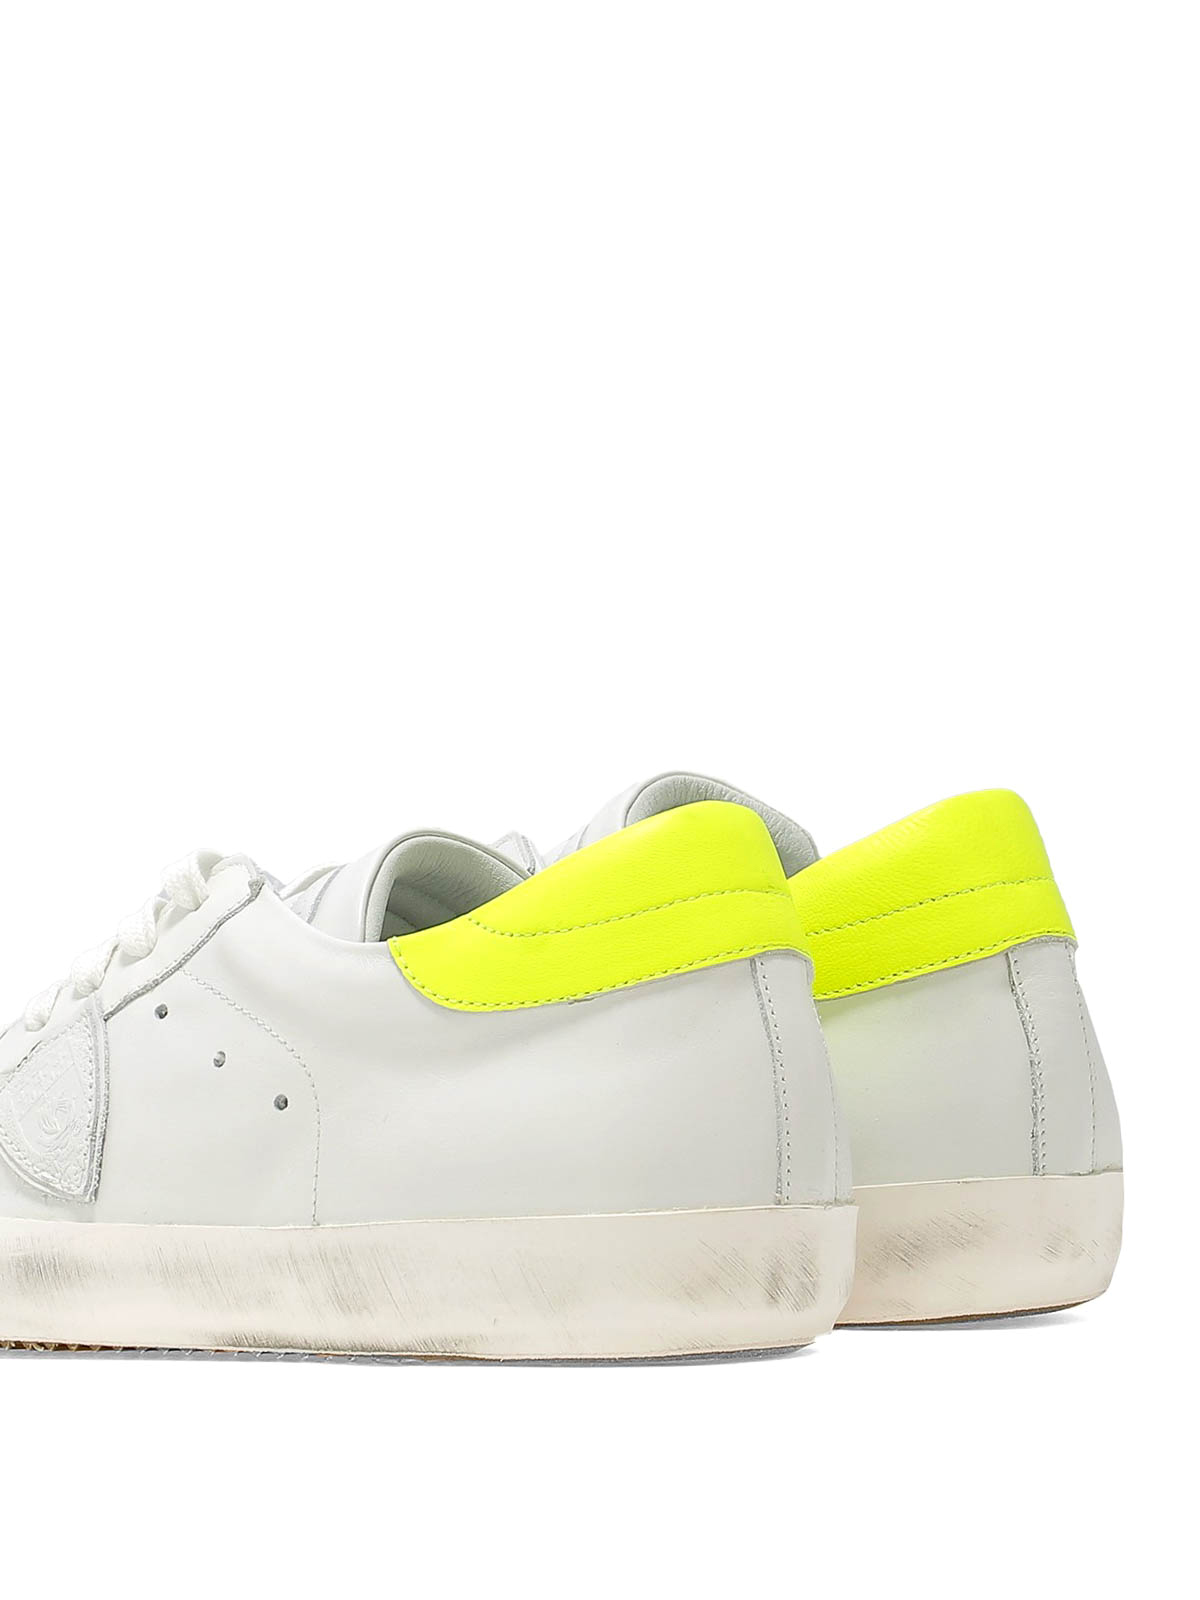 Trainers Philippe Model - Paris low top white and yellow sneakers 